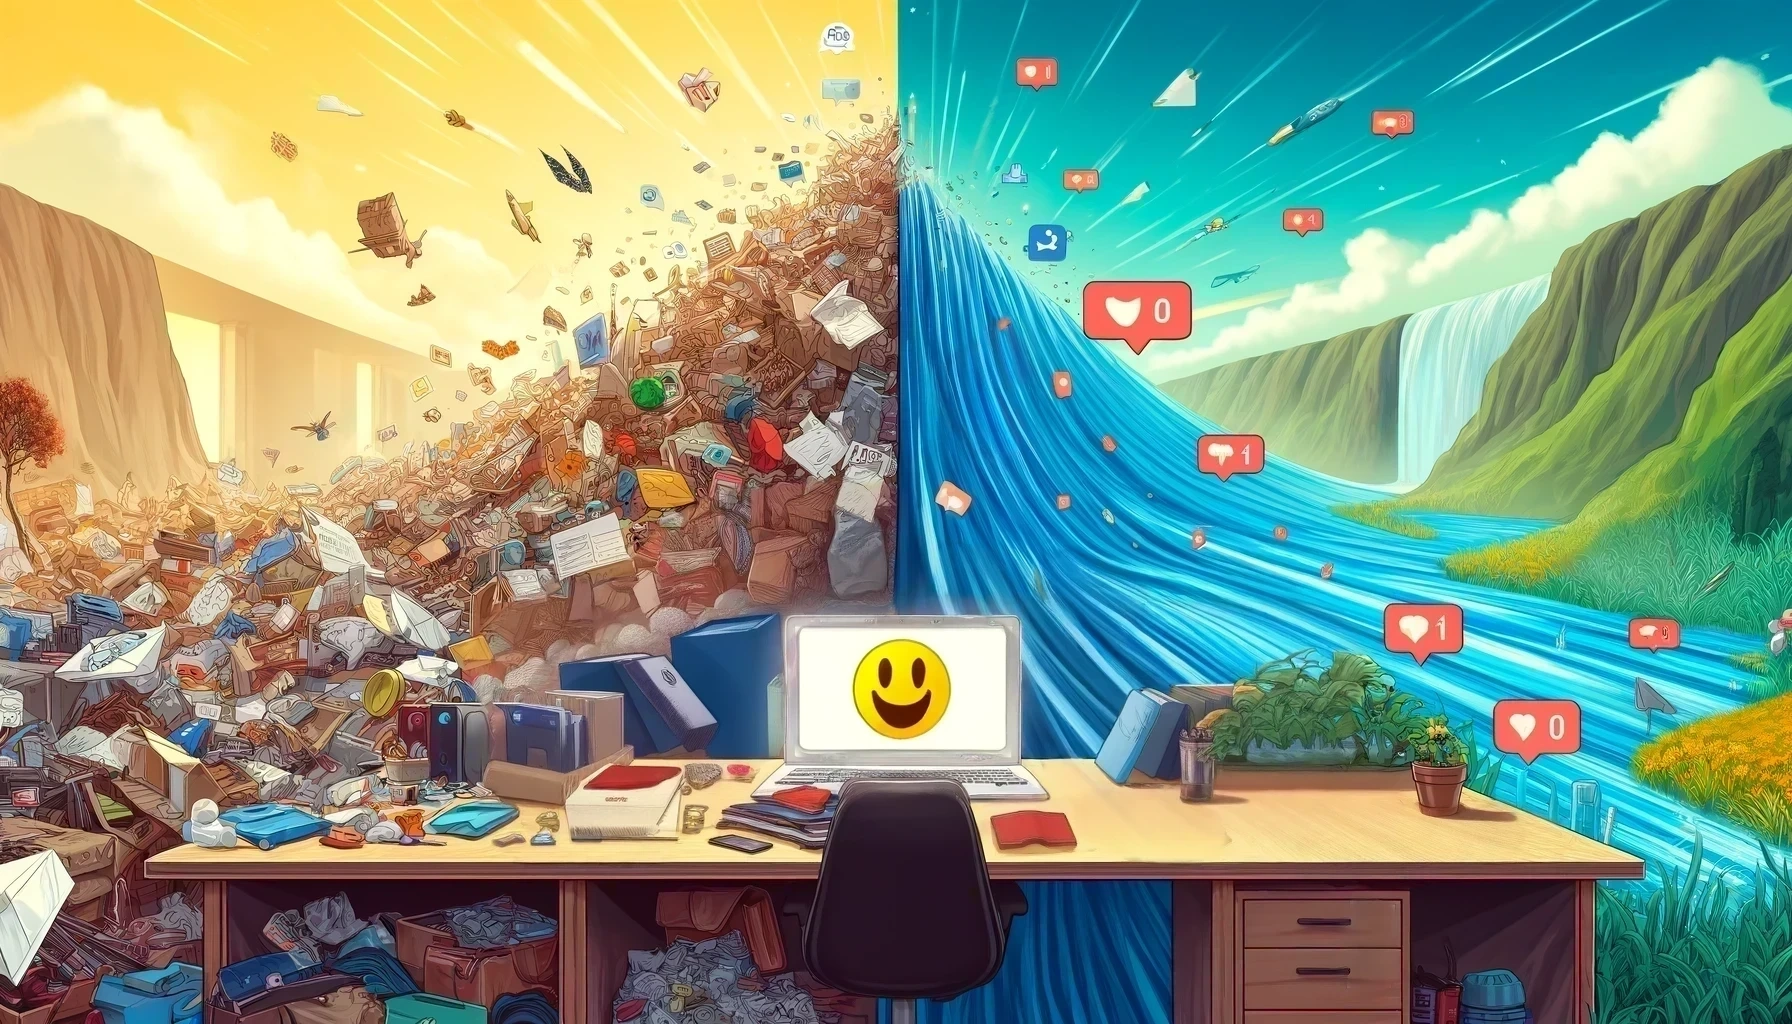 Illustration presenting a transformation from a chaotic, cluttered workspace to an organized, efficient one, depicted in a modern digital painting style. These visuals capture the theme of transitioning from an overwhelming flow of Slack notifications, represented by a garbage landfill, to a structured, clutter-free environment, represented by a river flow and green fields.